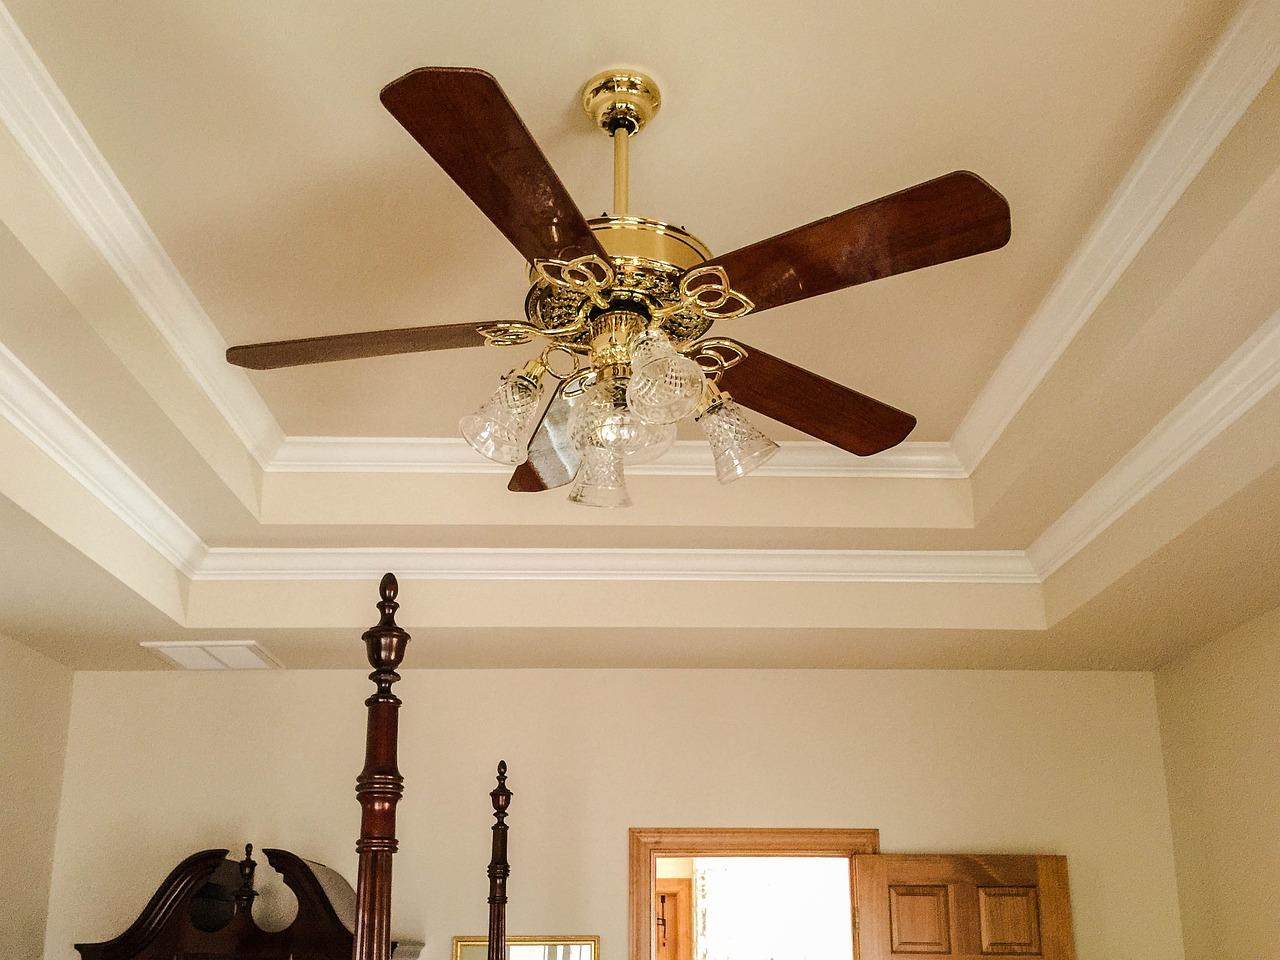  How To Mount A Ceiling Fan On A Vaulted Ceiling 